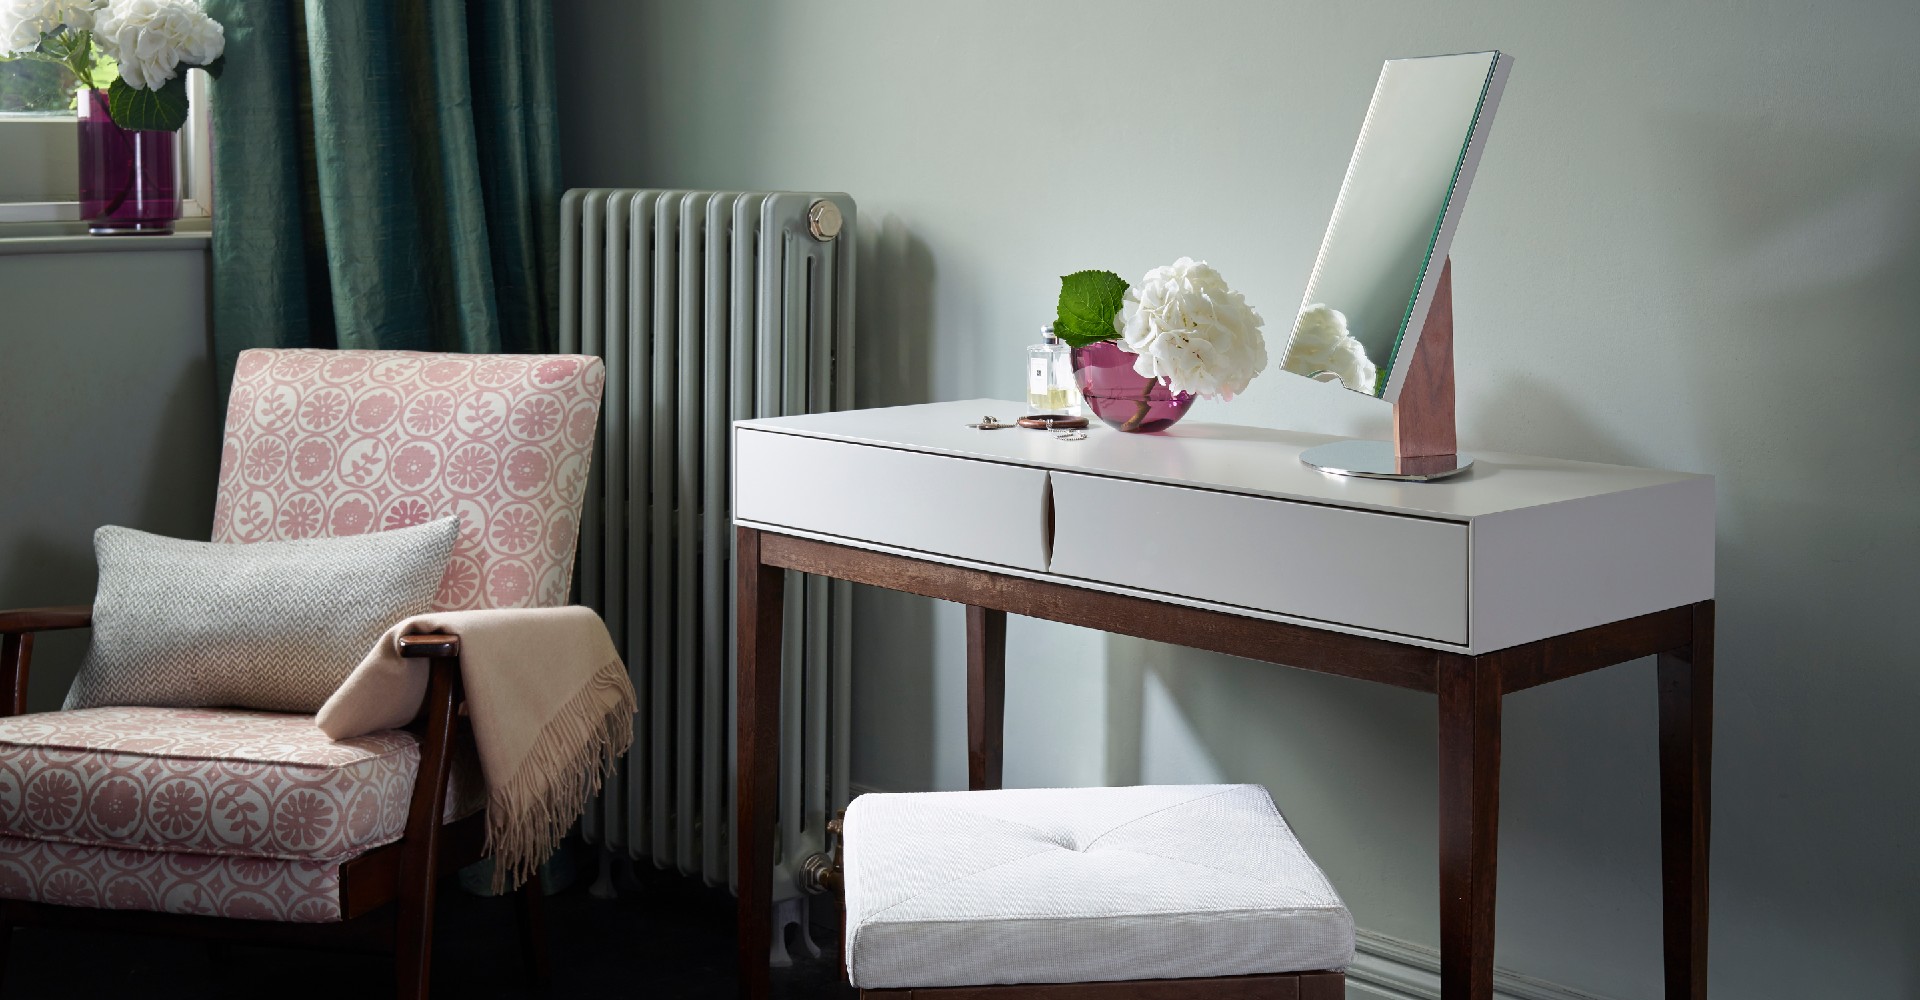 Lux Dressing Table Or Console Table With Lux Upholstered Stool © GillmoreSPACE Ltd